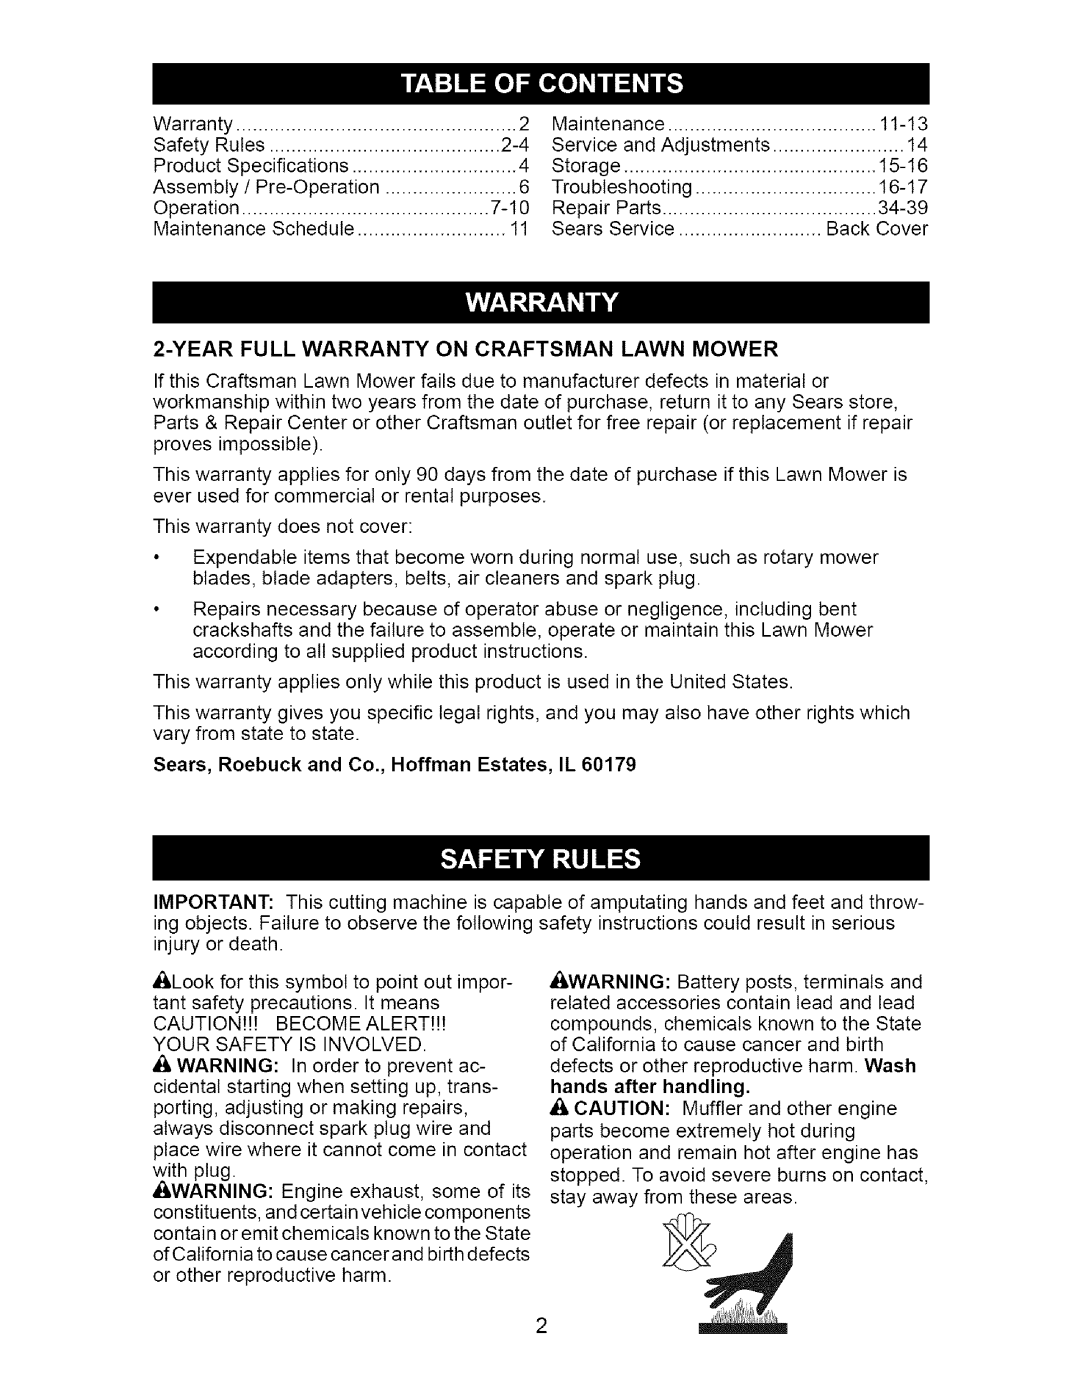 Craftsman 917.385140 owner manual Yearfull Warranty On Craftsman Lawn Mower, Sears, Roebuck and Co., Hoffman Estates, IL 